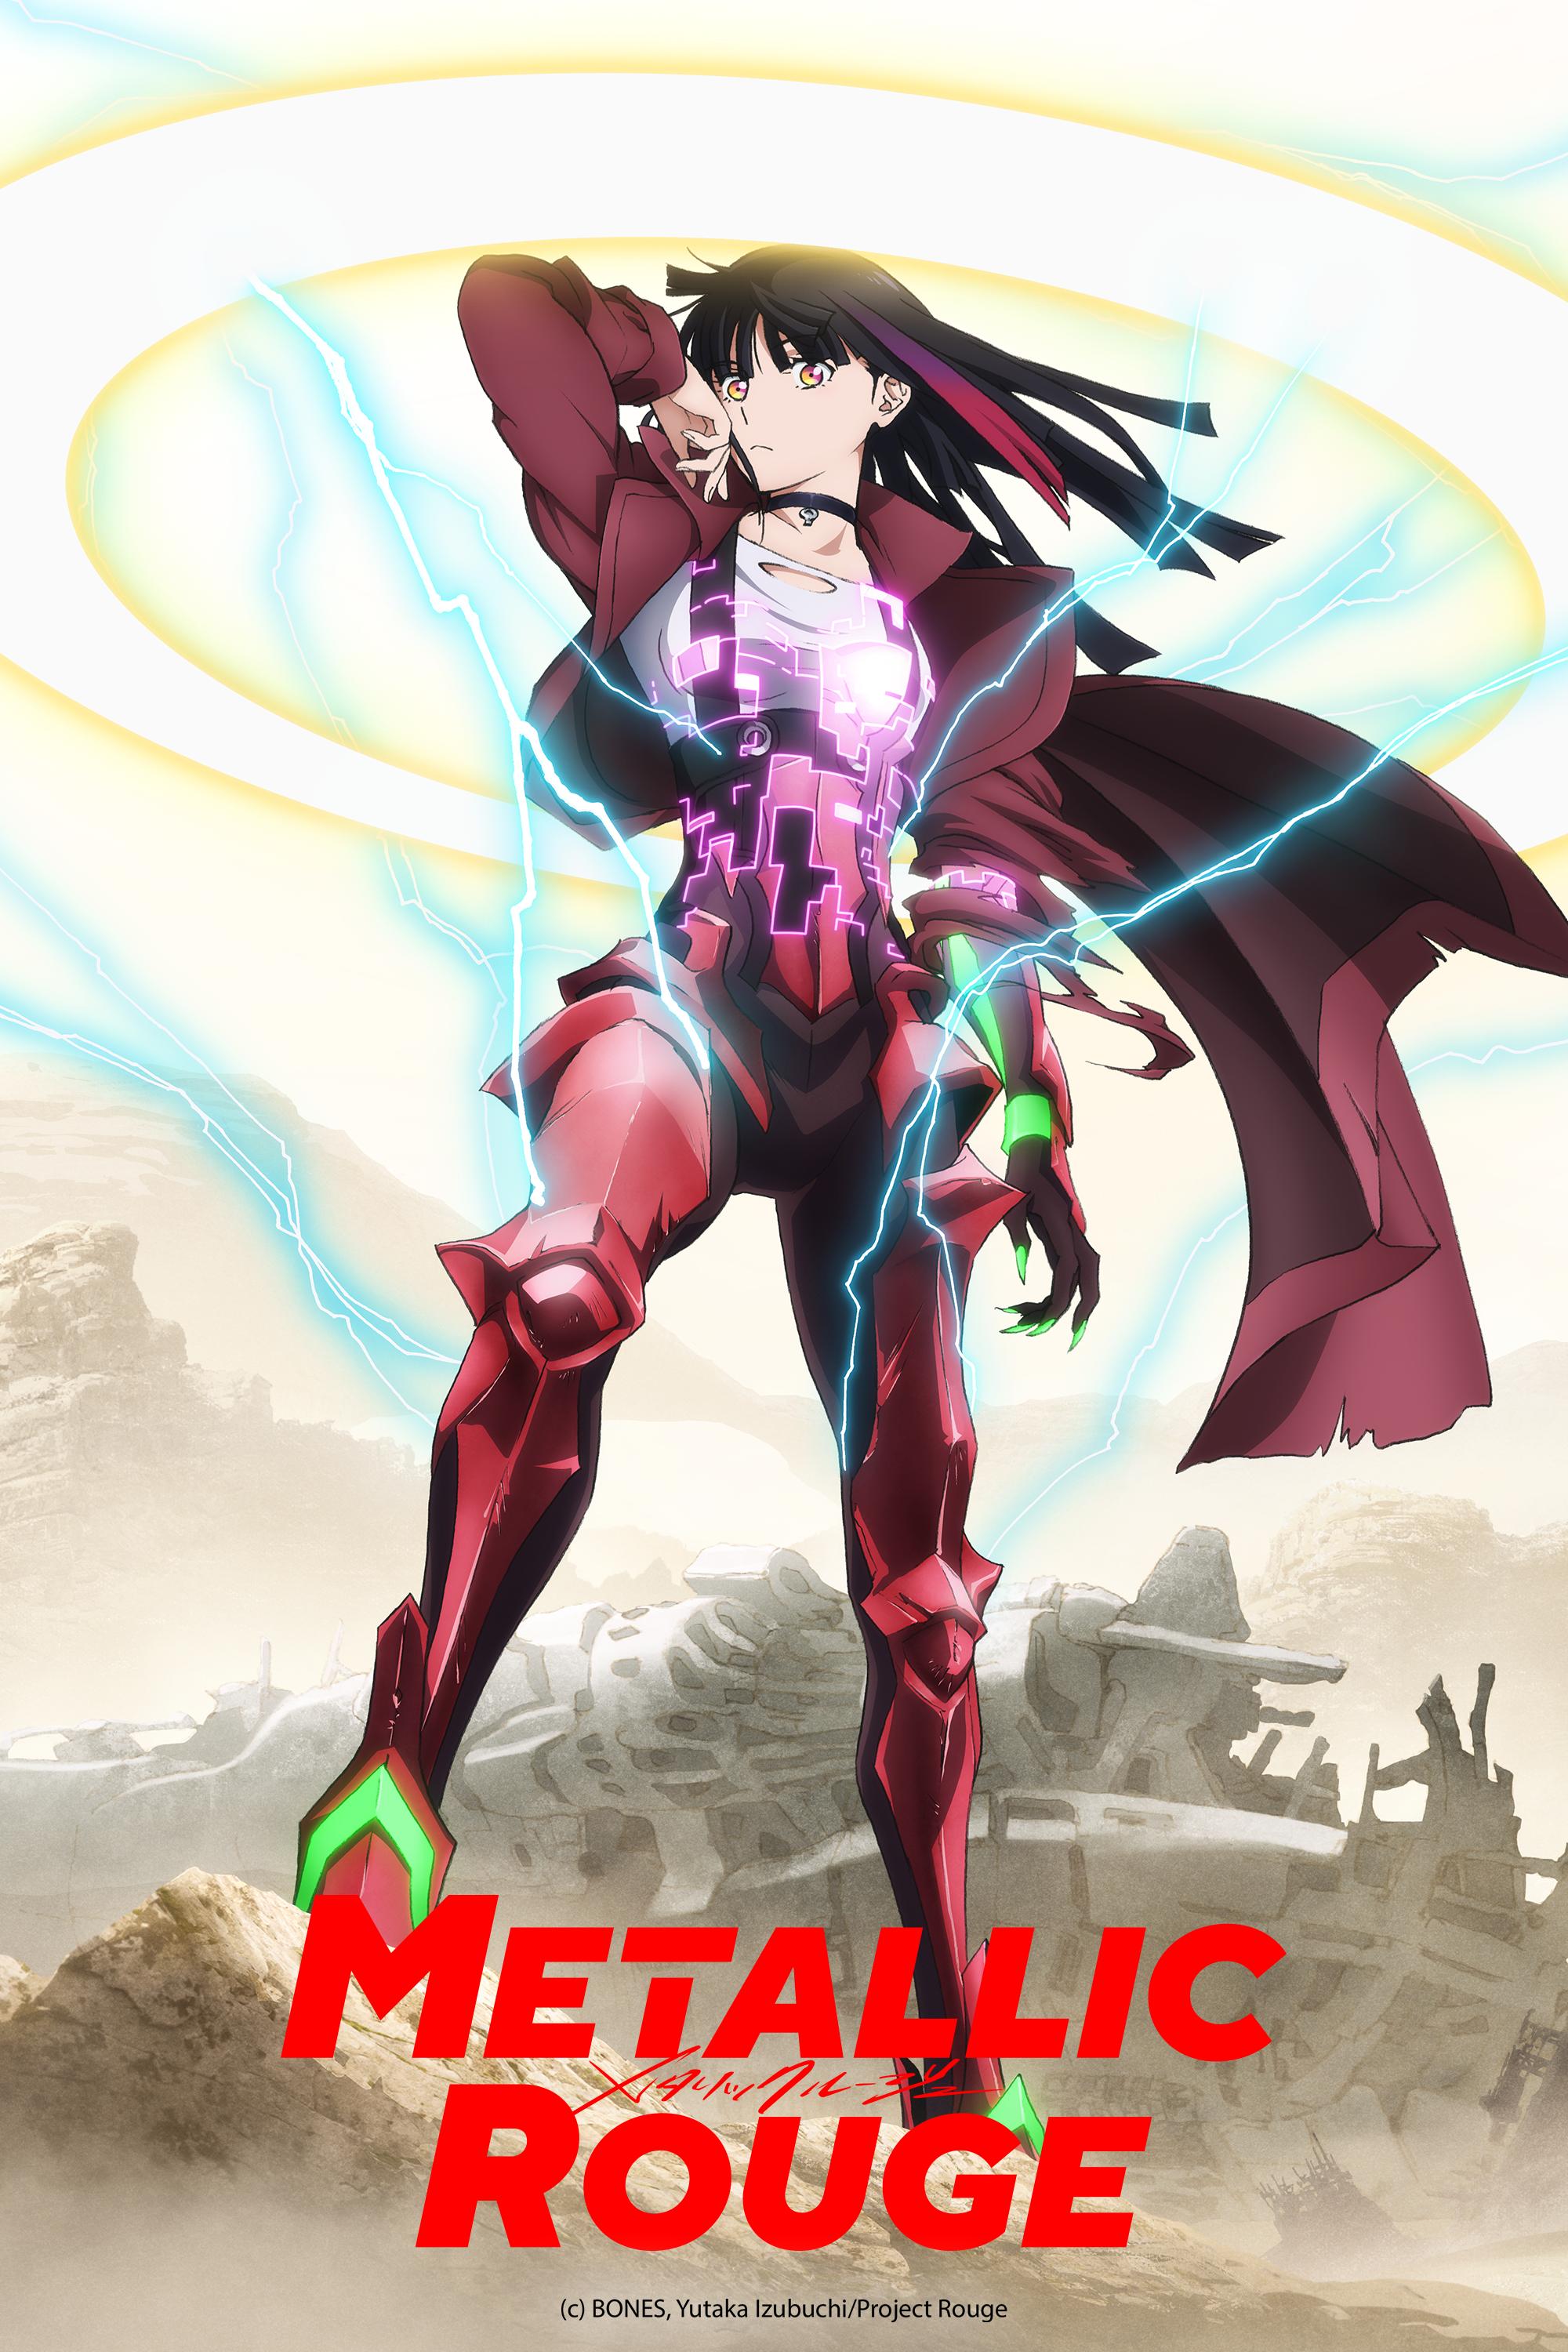 Metallic Rouge (January 10) - Streaming on Crunchyroll
Metallic Rouge unfolds in a universe where humans and androids coexist. The anime follows Rouge Redstar, an android, and her human partner, Naomi Orthmann, on a mission to neutralize the synthetic beings known as the Immortal Nine, posing a threat on Mars. This unique mecha story explores character relationships, dark narratives, and boasts originality in its storytelling.